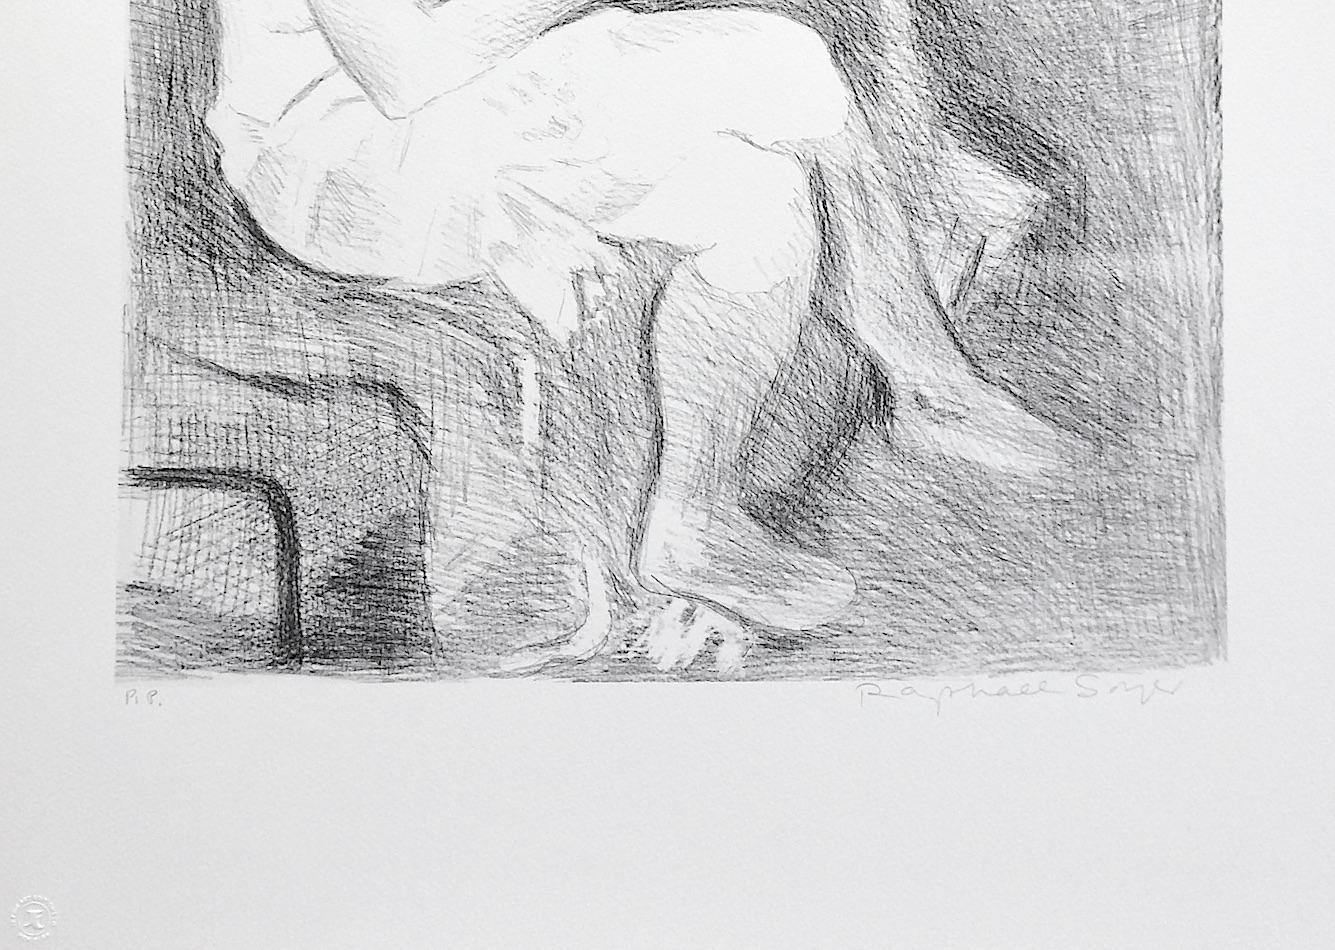 SEATED WOMAN ON BED, KNEE SOCKS Signed Lithograph, Female Portrait Drawing - Realist Print by Raphael Soyer